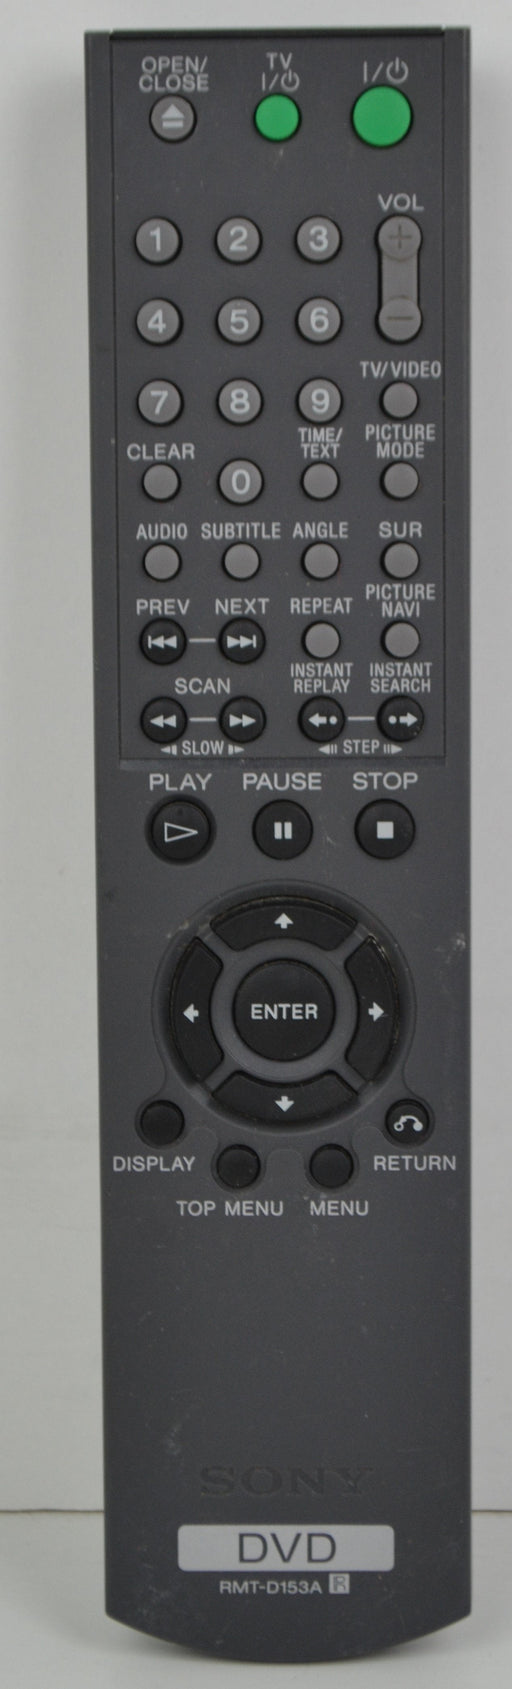 Sony RMT-D153A DVD Player Remote Control-Remote-SpenCertified-refurbished-vintage-electonics